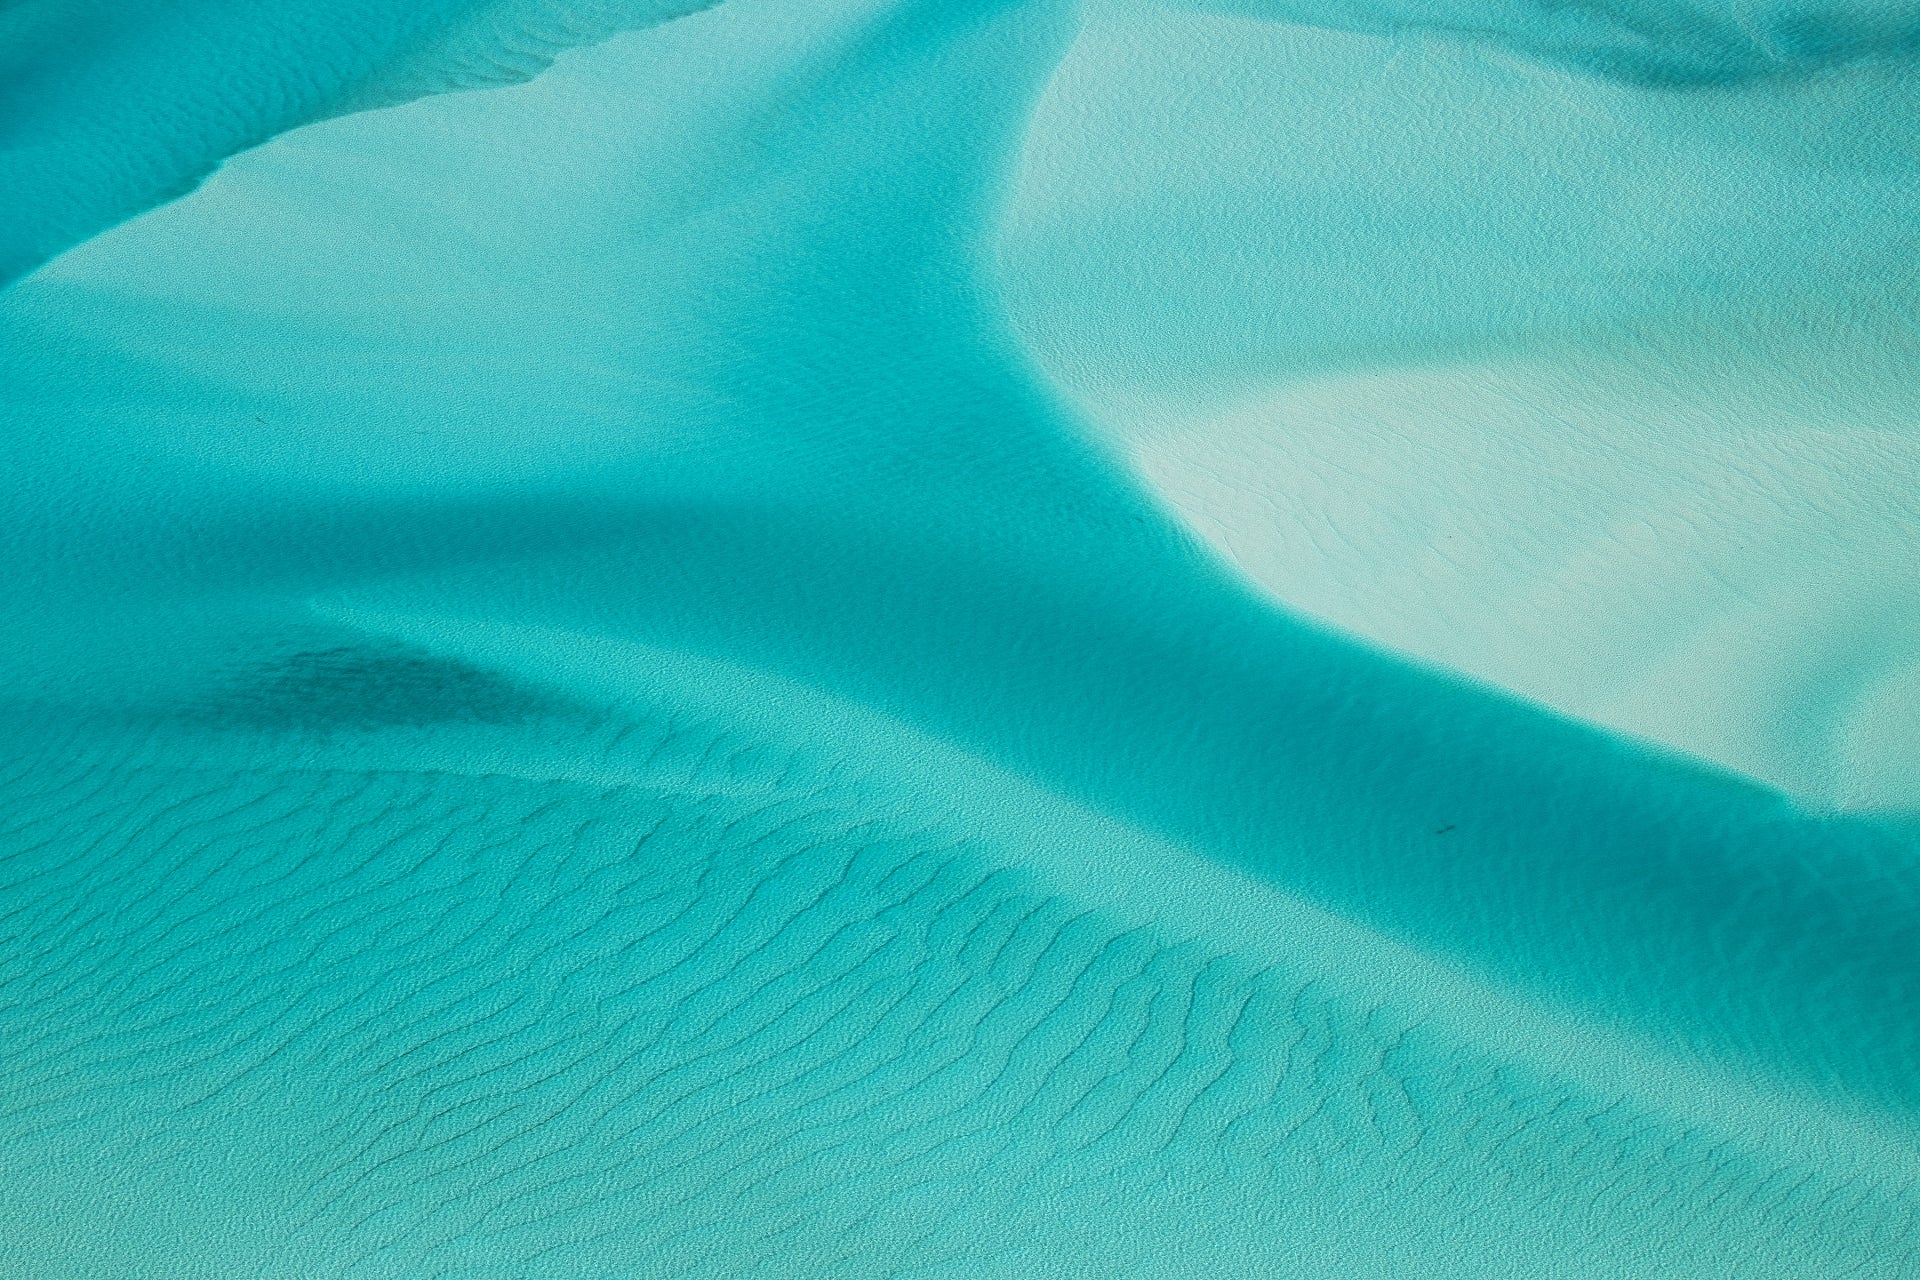 close up ripple of turquise waters amongst white sand